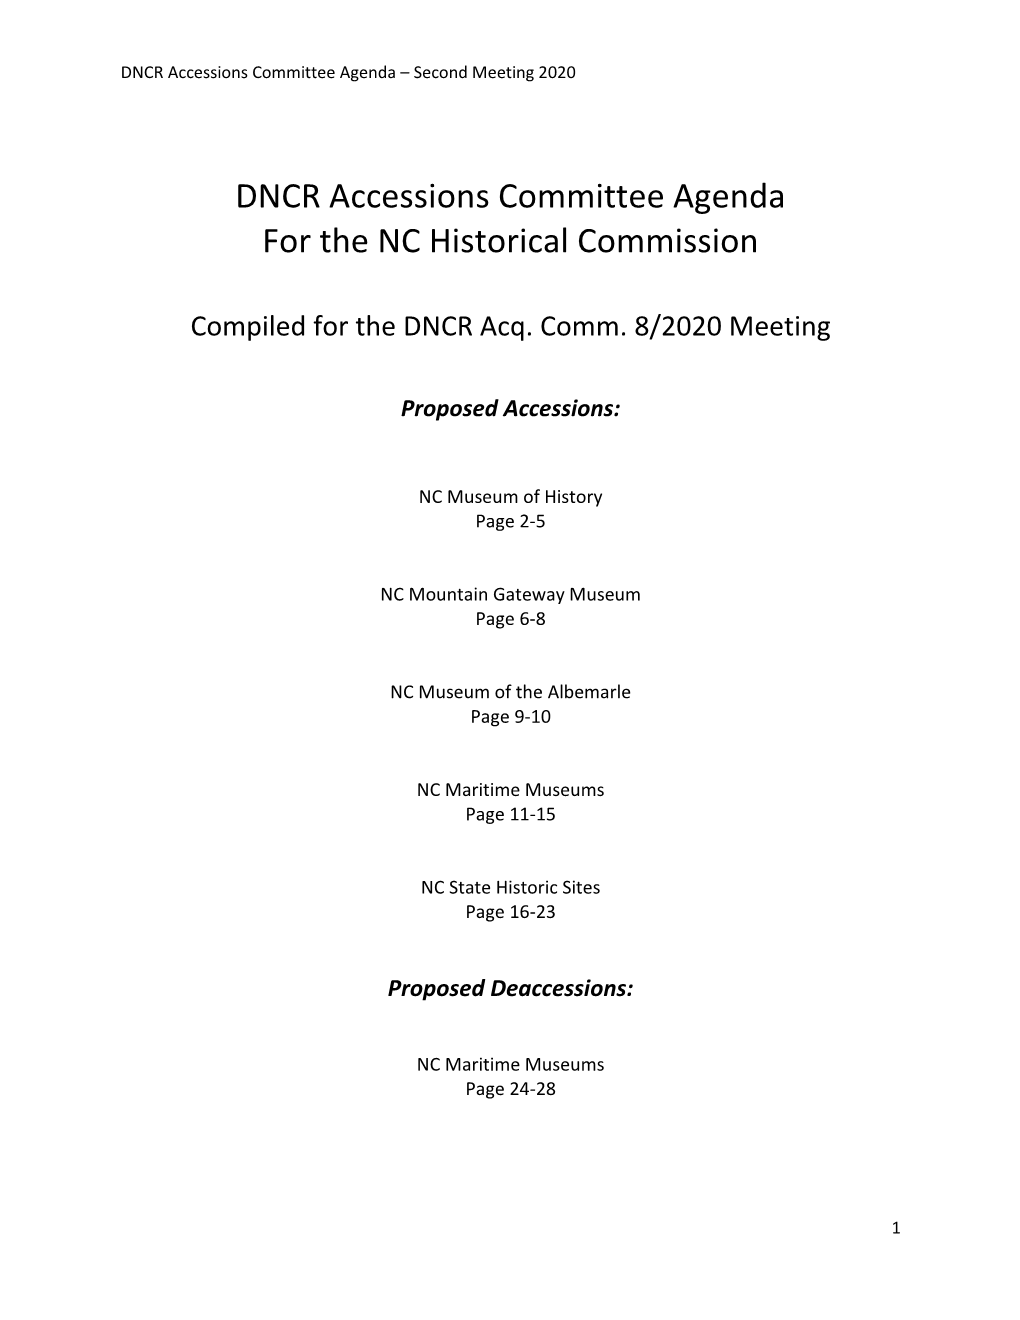 DNCR Accessions Committee Agenda for the NC Historical Commission